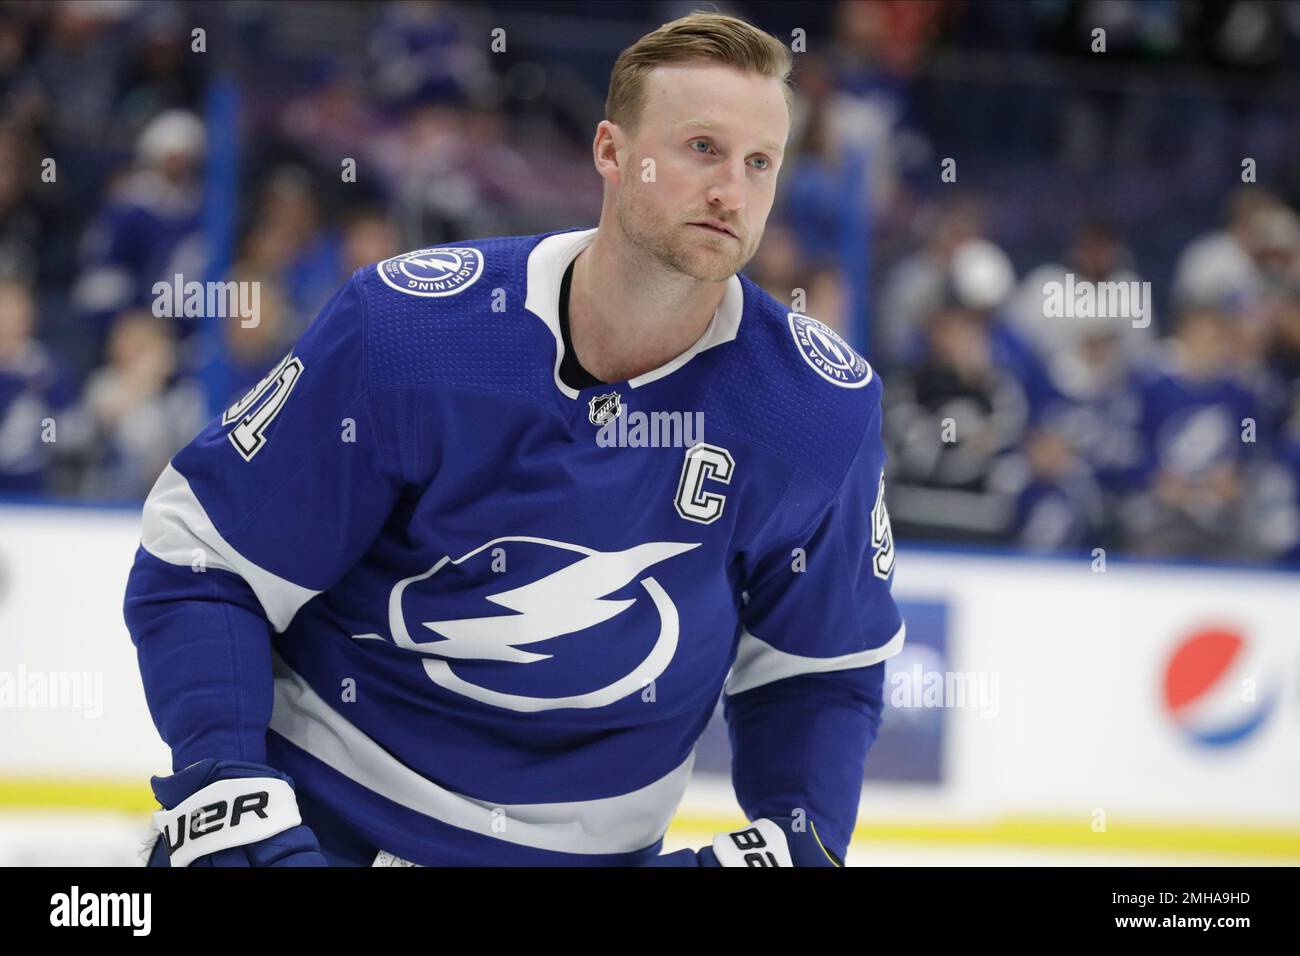 Dec 21, 2011; San Jose, CA, USA; Tampa Bay Lightning center Steven Stamkos ( 91) warms up before the game against the San Jose Sharks at HP Pavilion  Stock Photo - Alamy